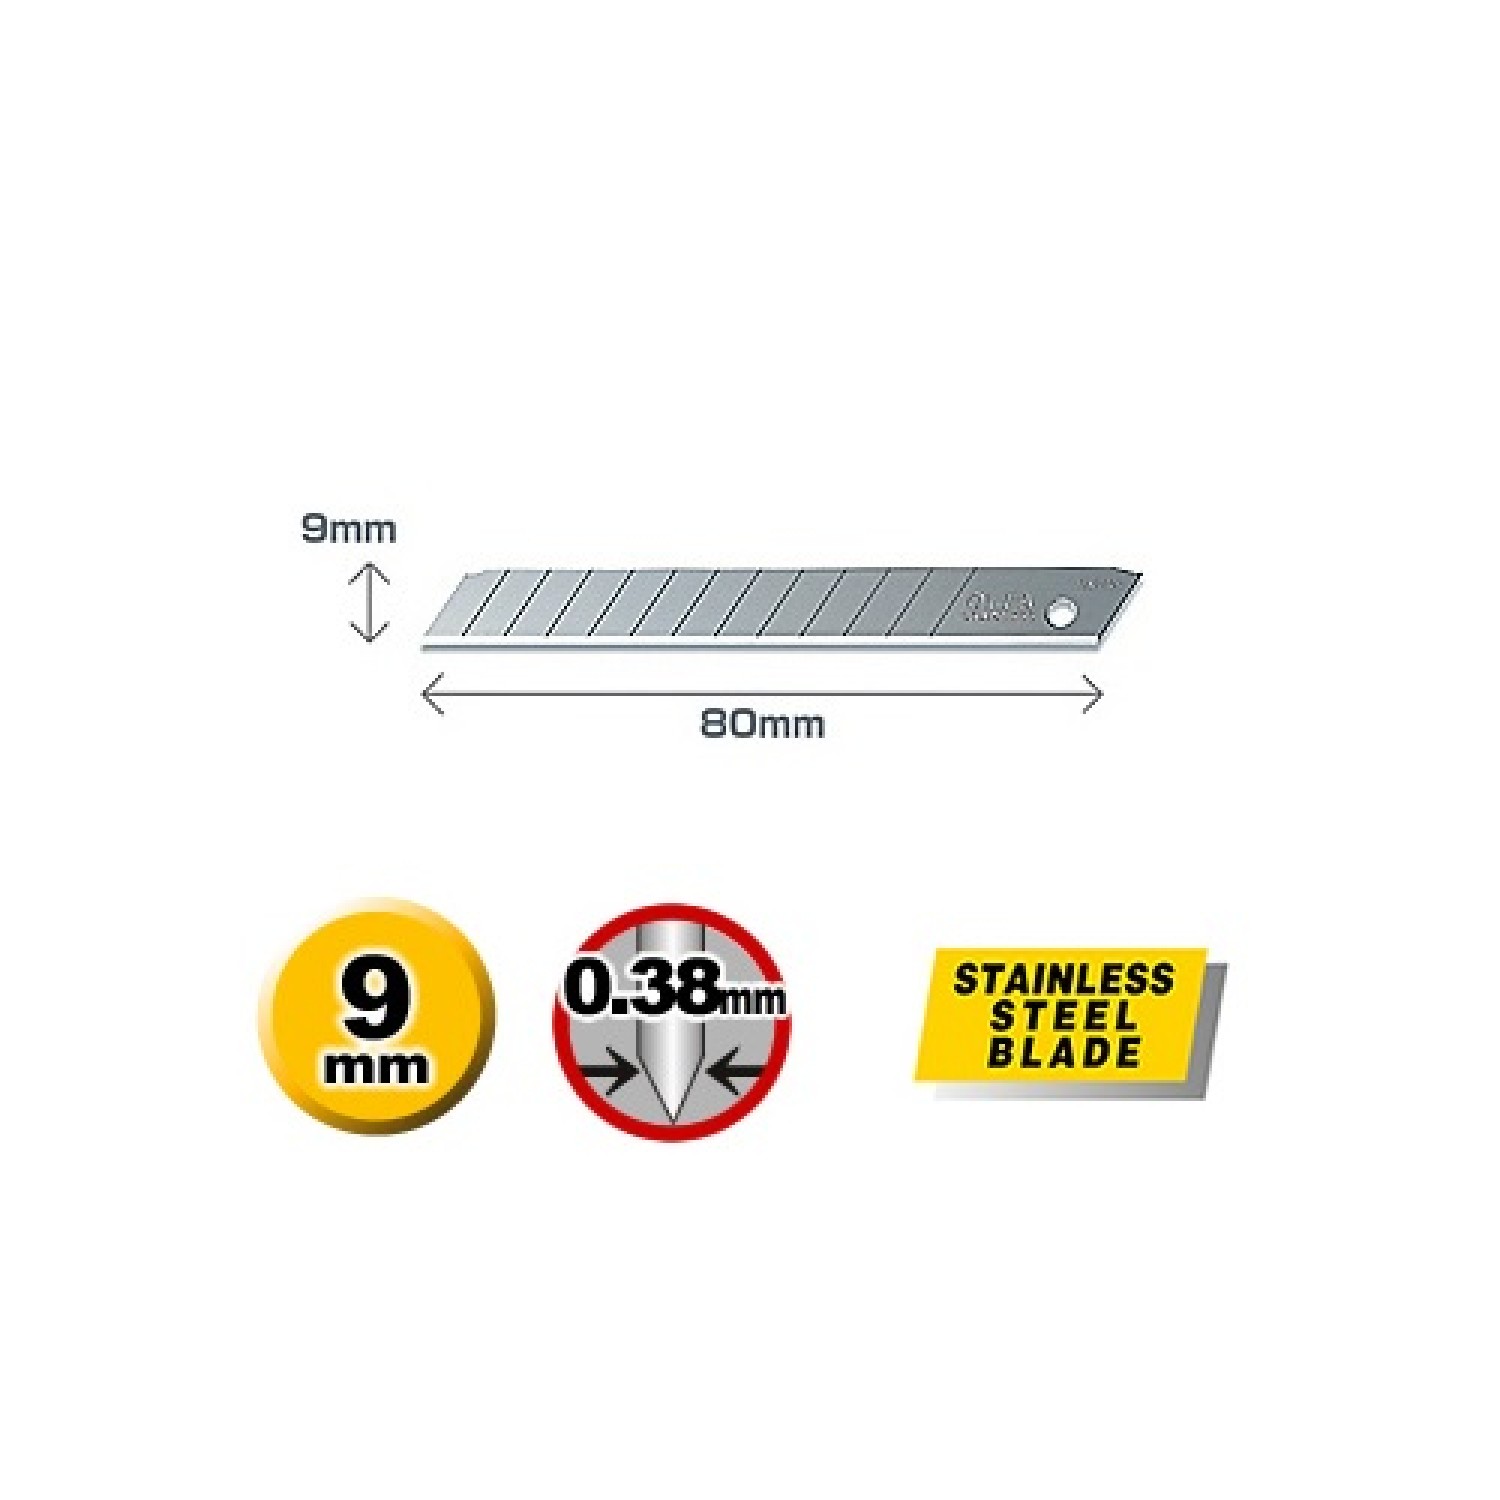 Olfa AB-50S Stainless Steel Blade Dimensions